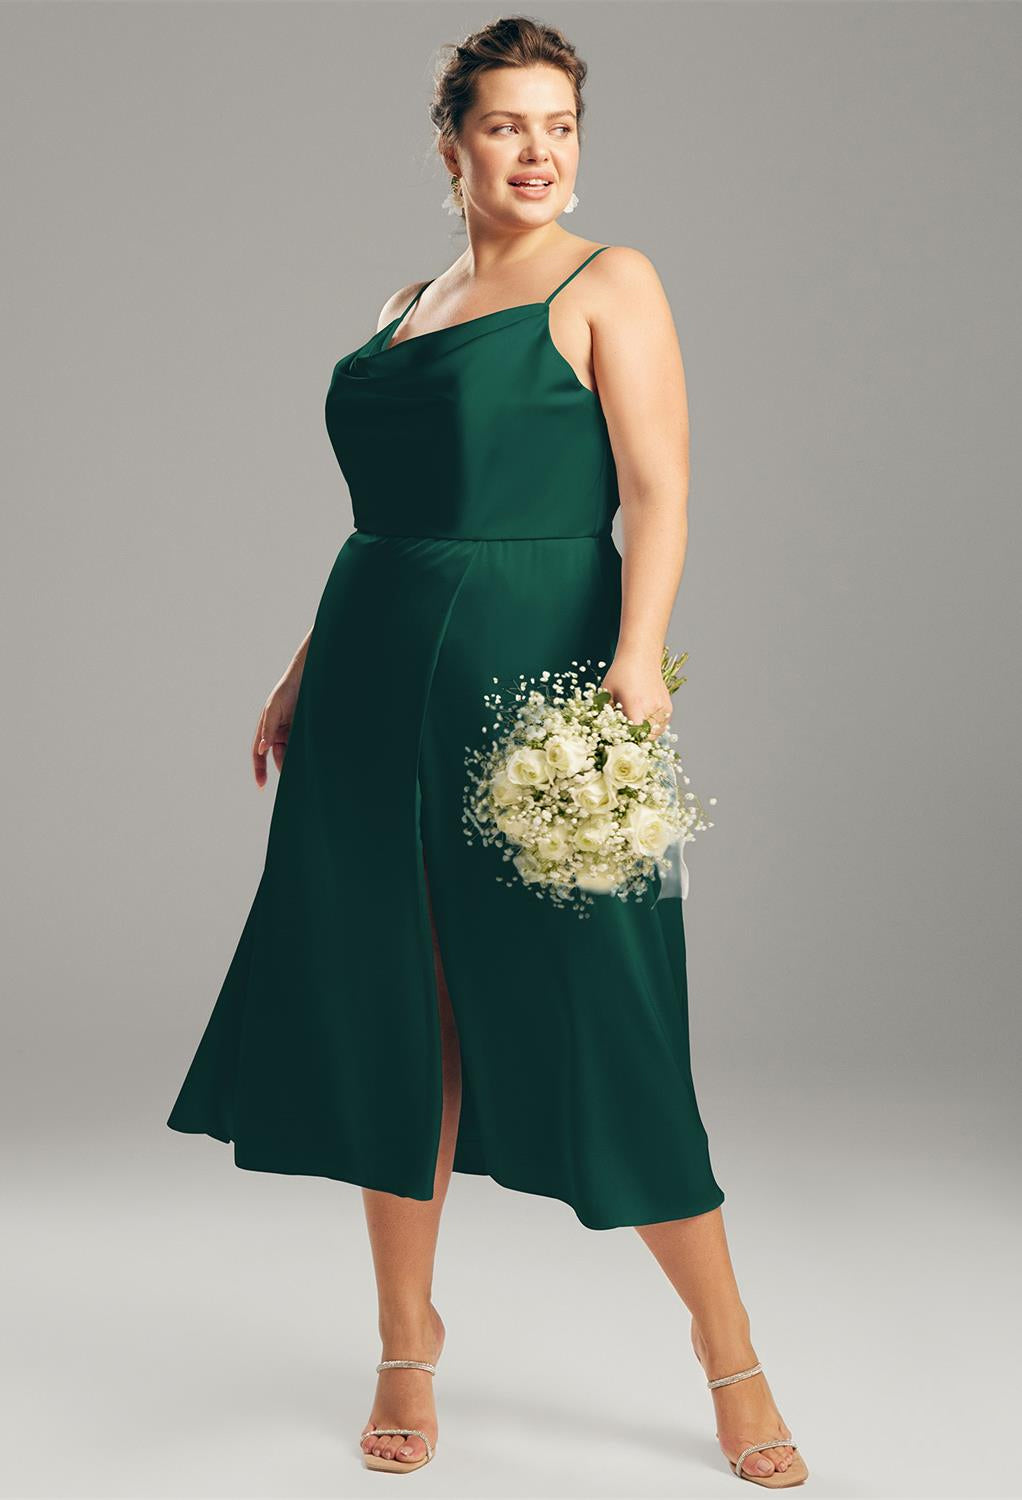 Renee - Satin Charmeuse Bridesmaid Dress - Off the Rack by Bergamot Bridal in emerald green available at bridal shops in London.